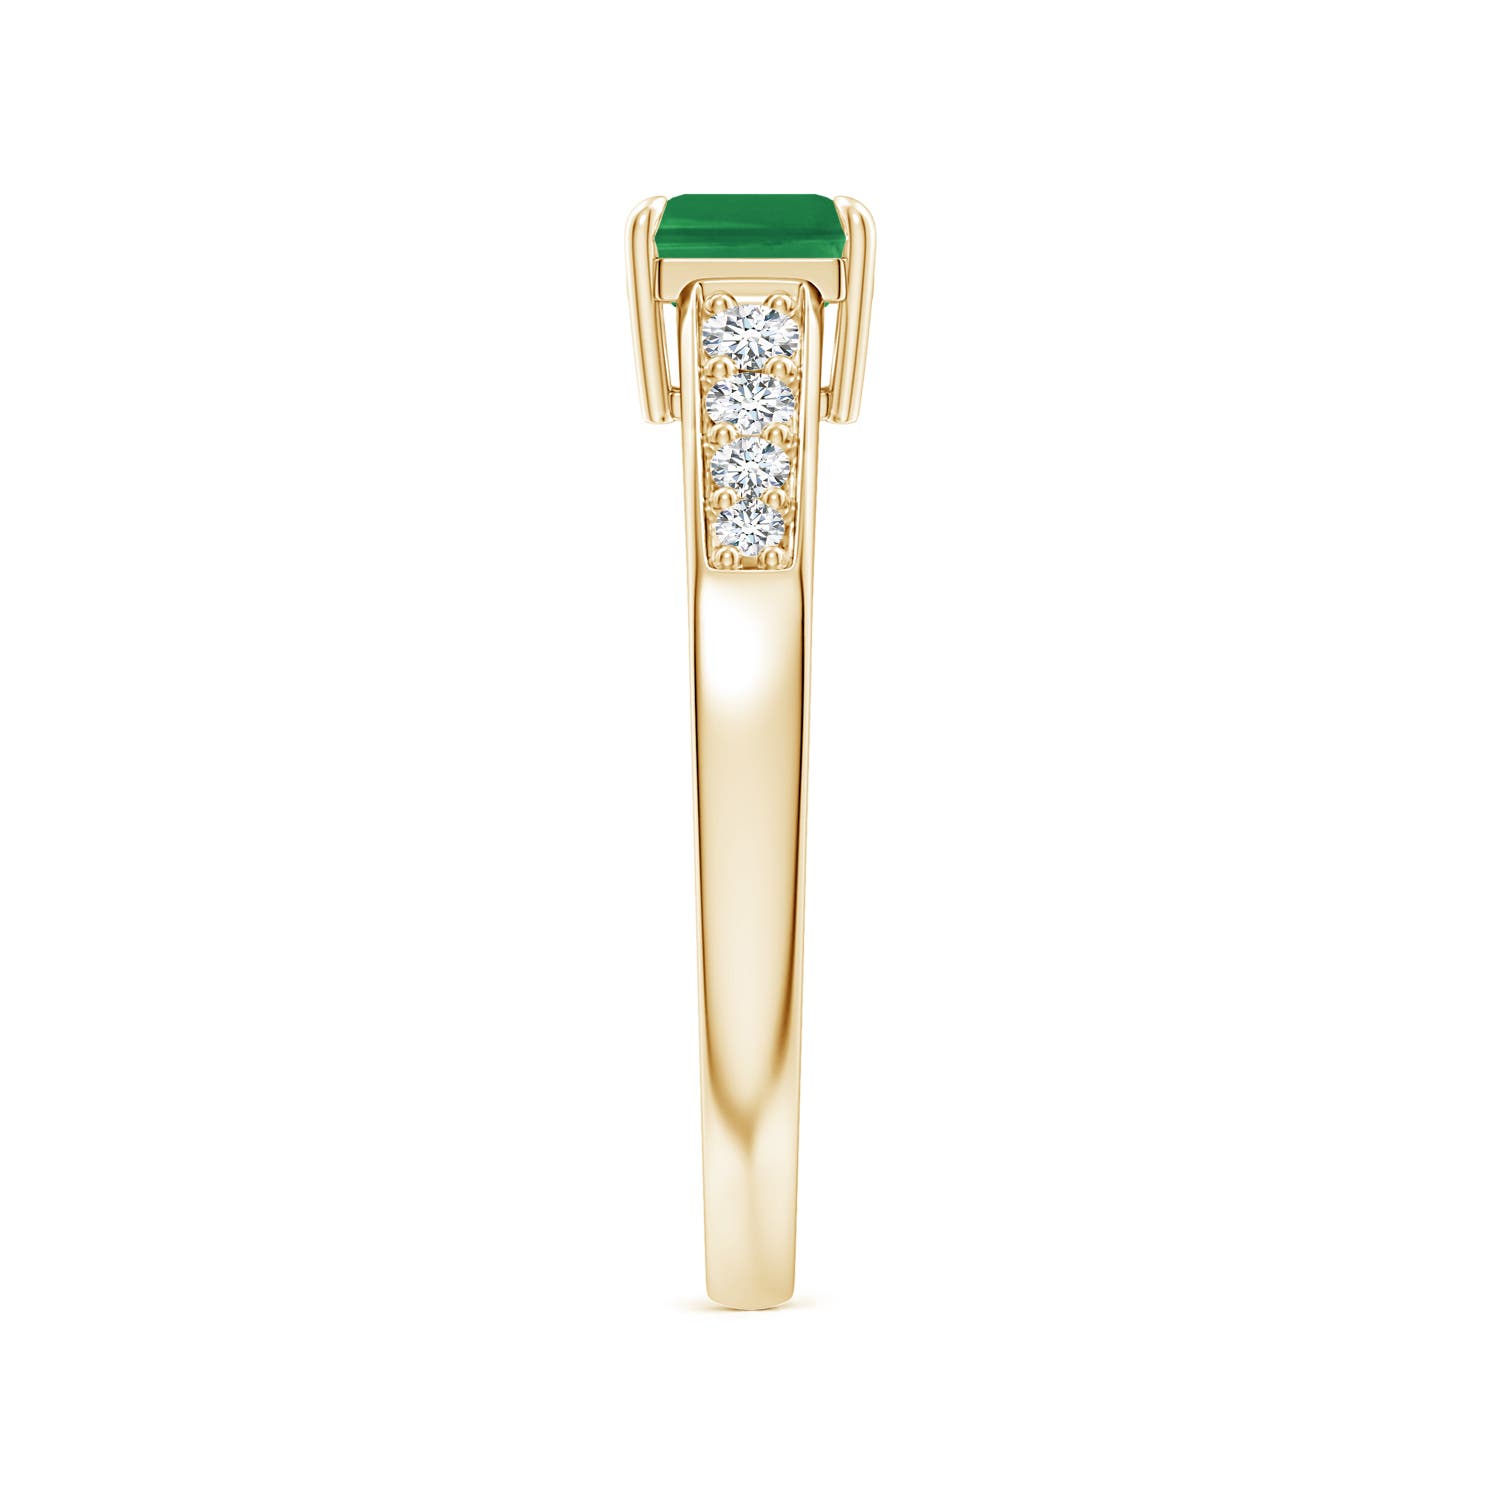 AA - Emerald / 1.18 CT / 14 KT Yellow Gold